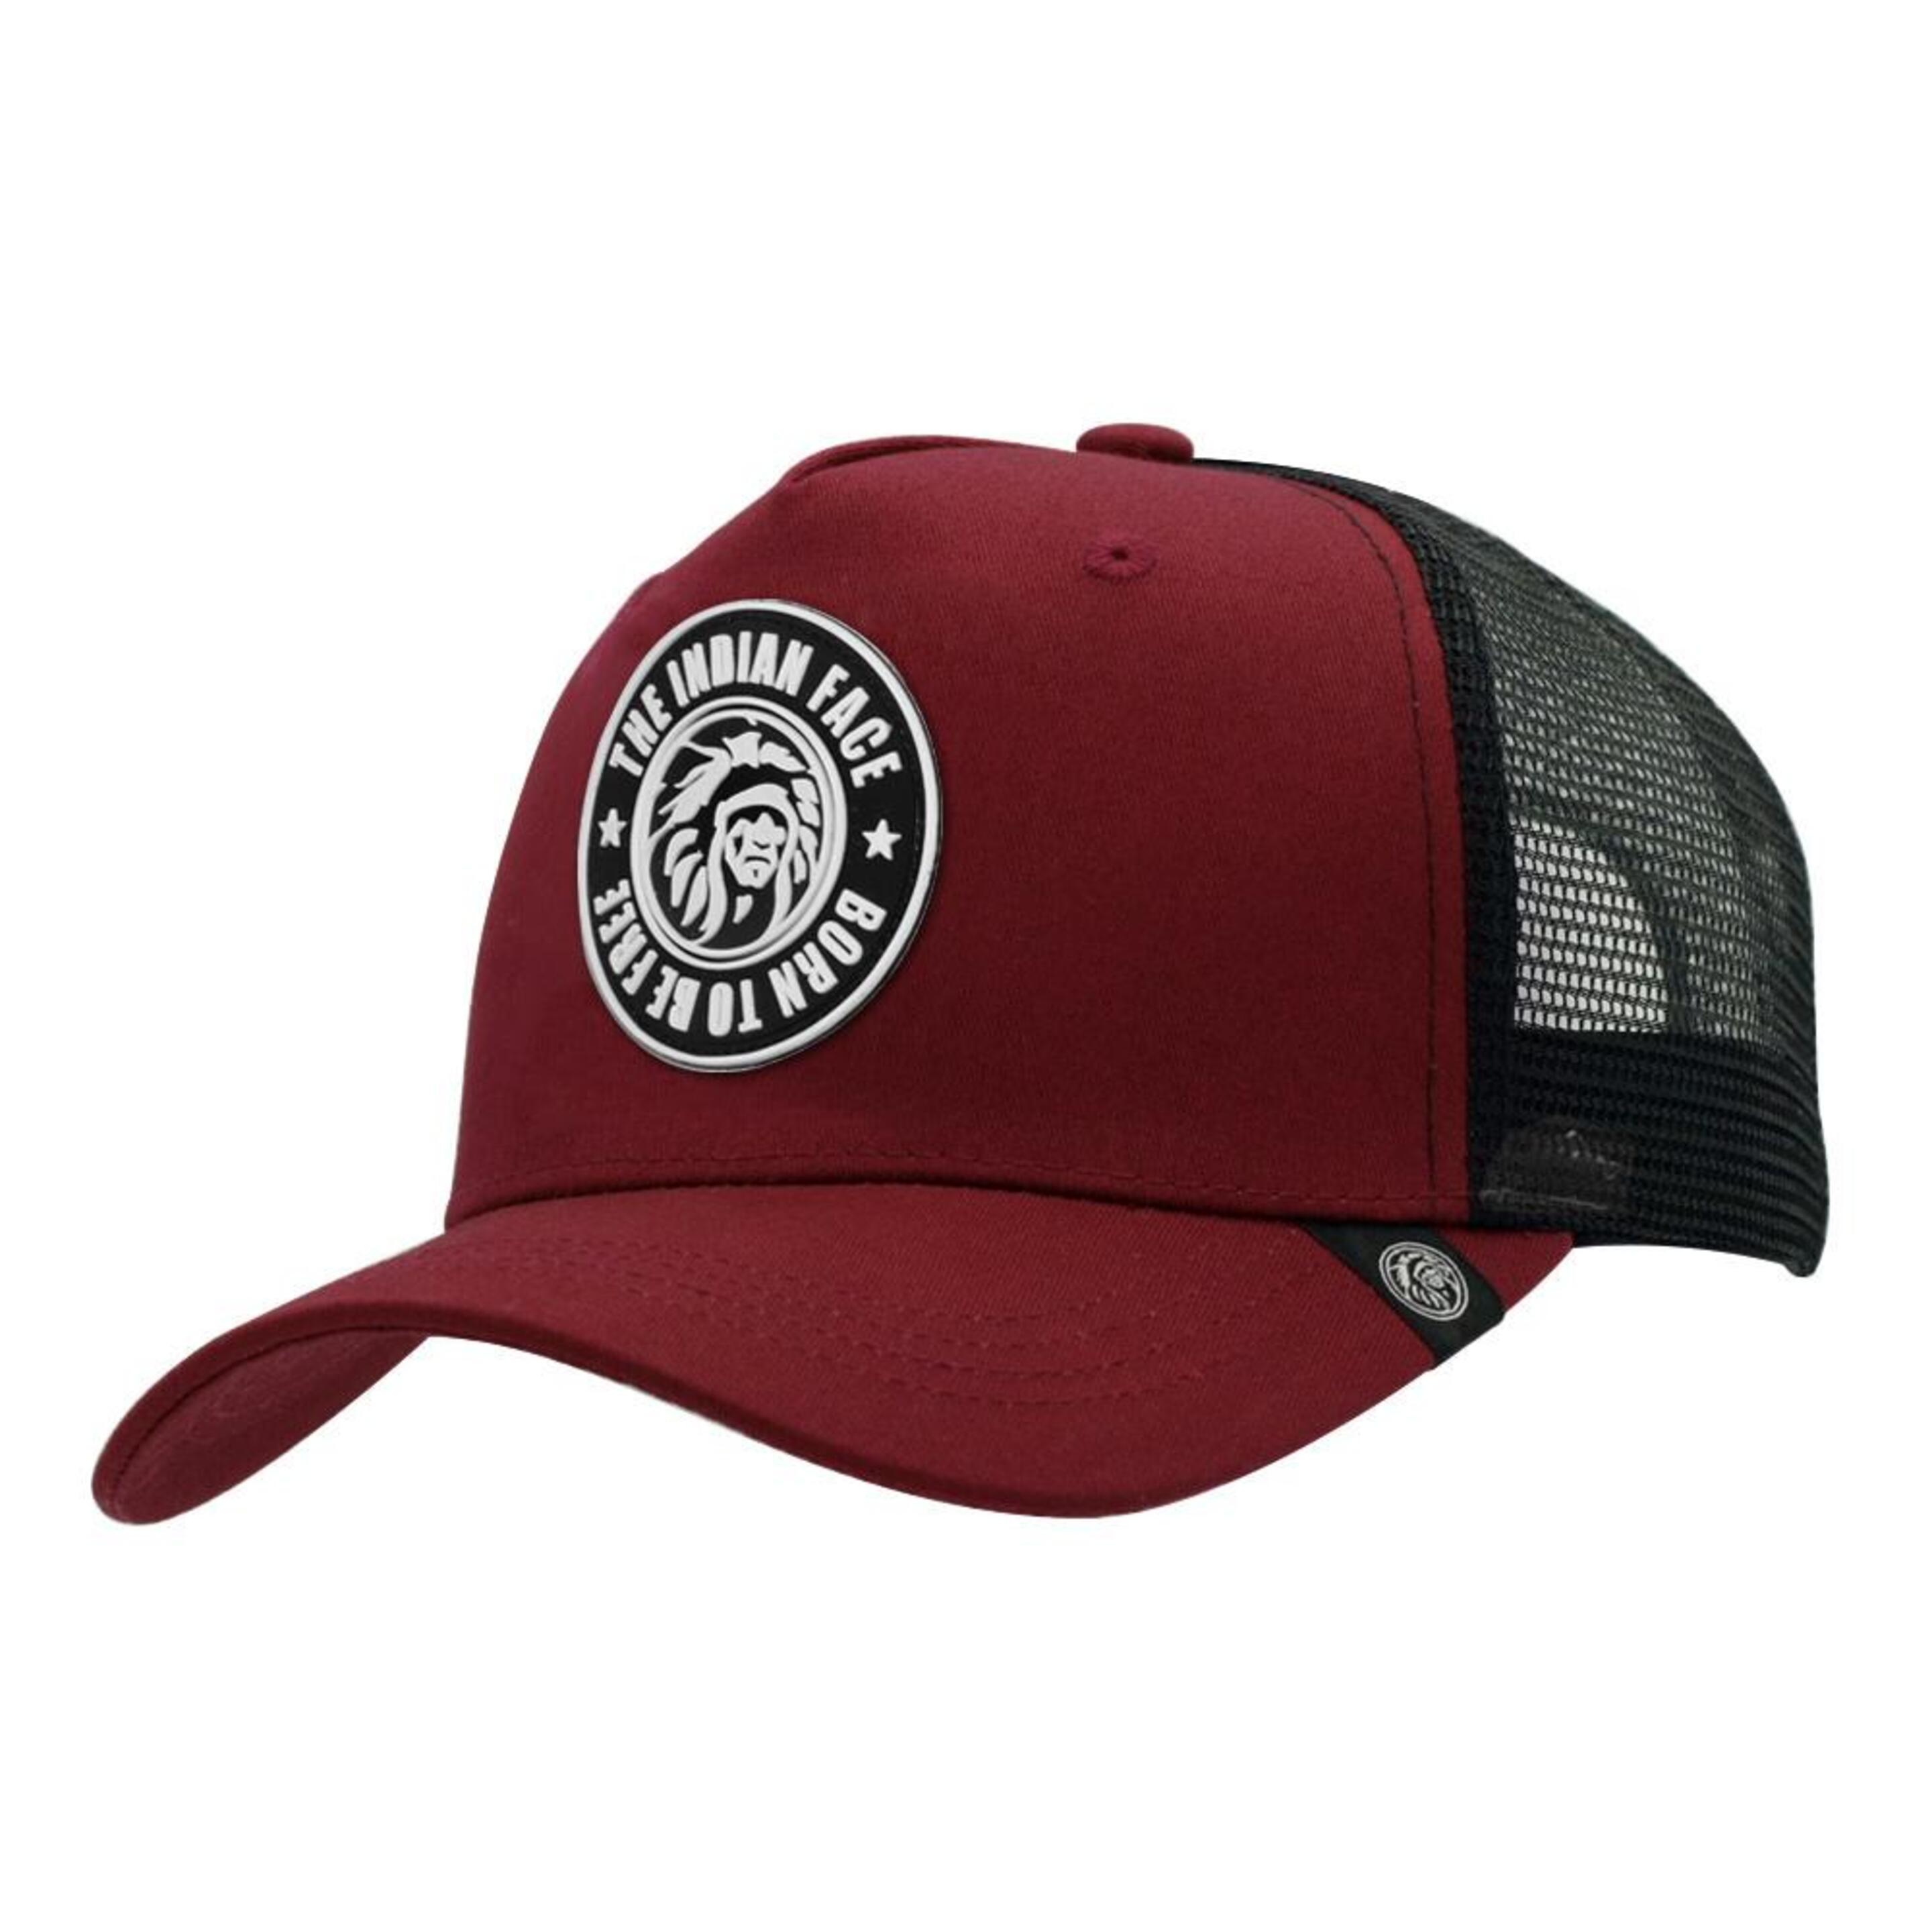 Gorra Trucker Born To Be Free Rojo The Indian Face Para Hombre Y Mujer